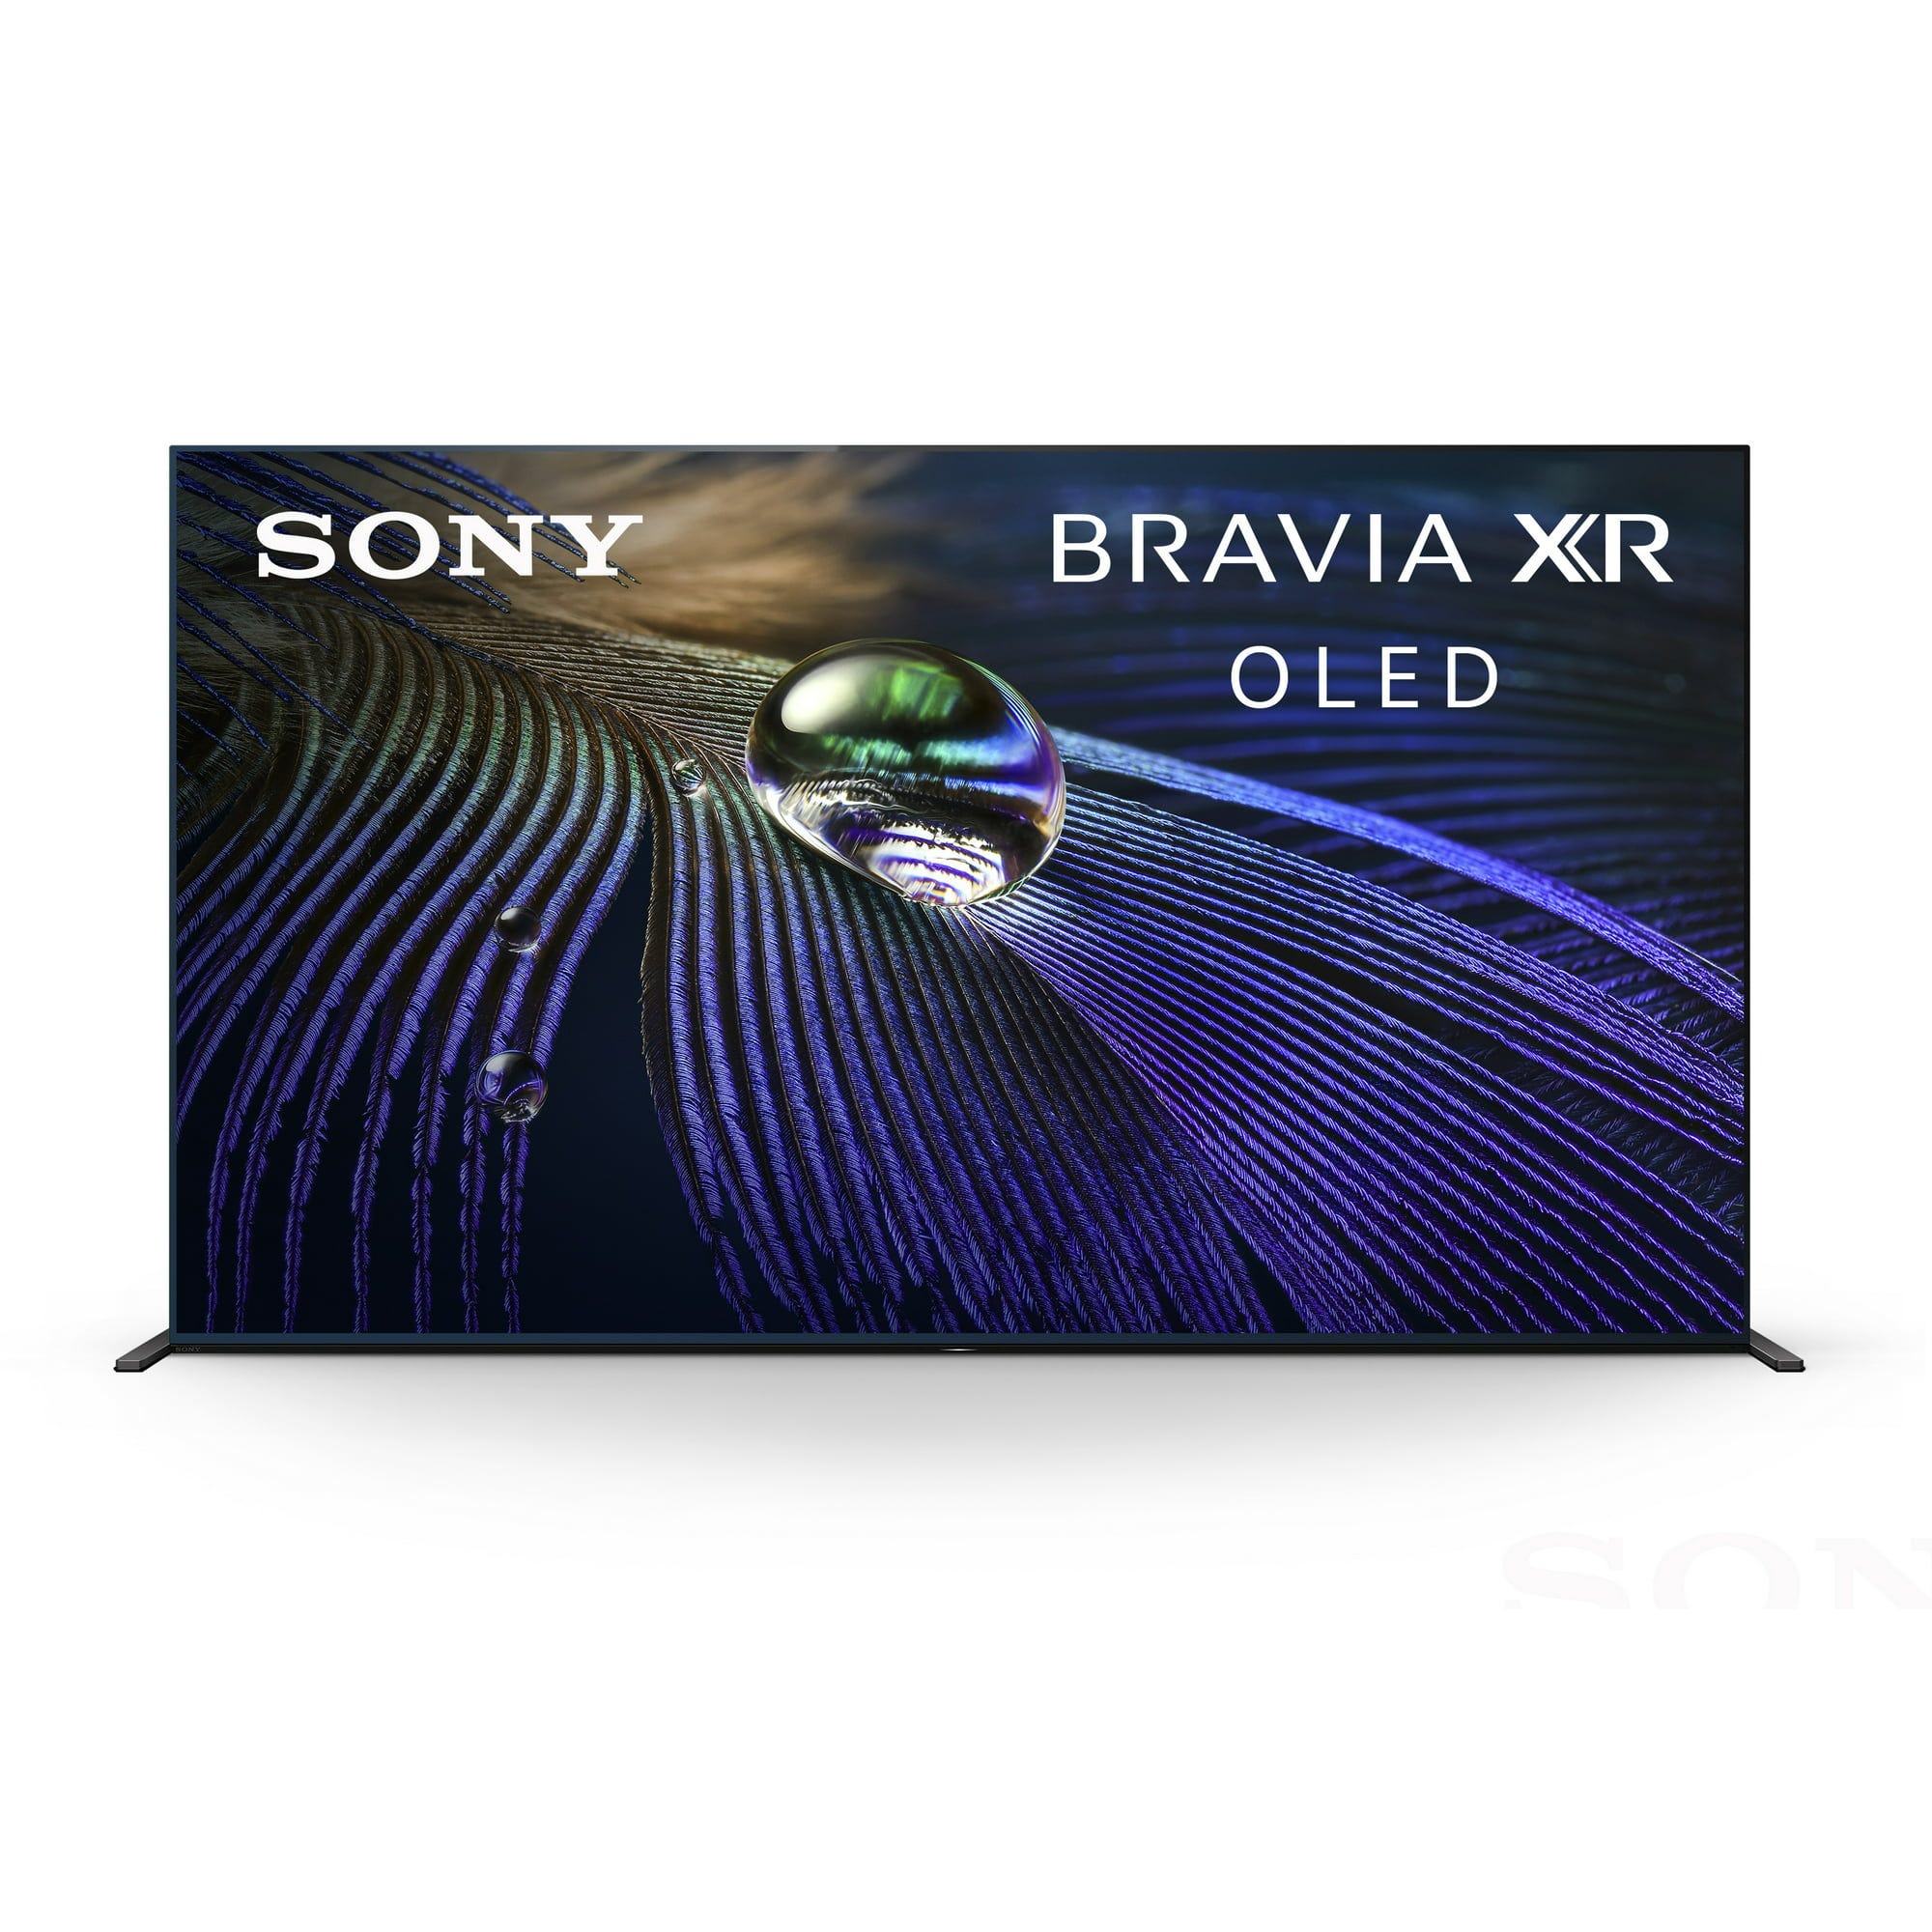 Get a 65-inch Sony TV for $800 off ahead of Black Friday